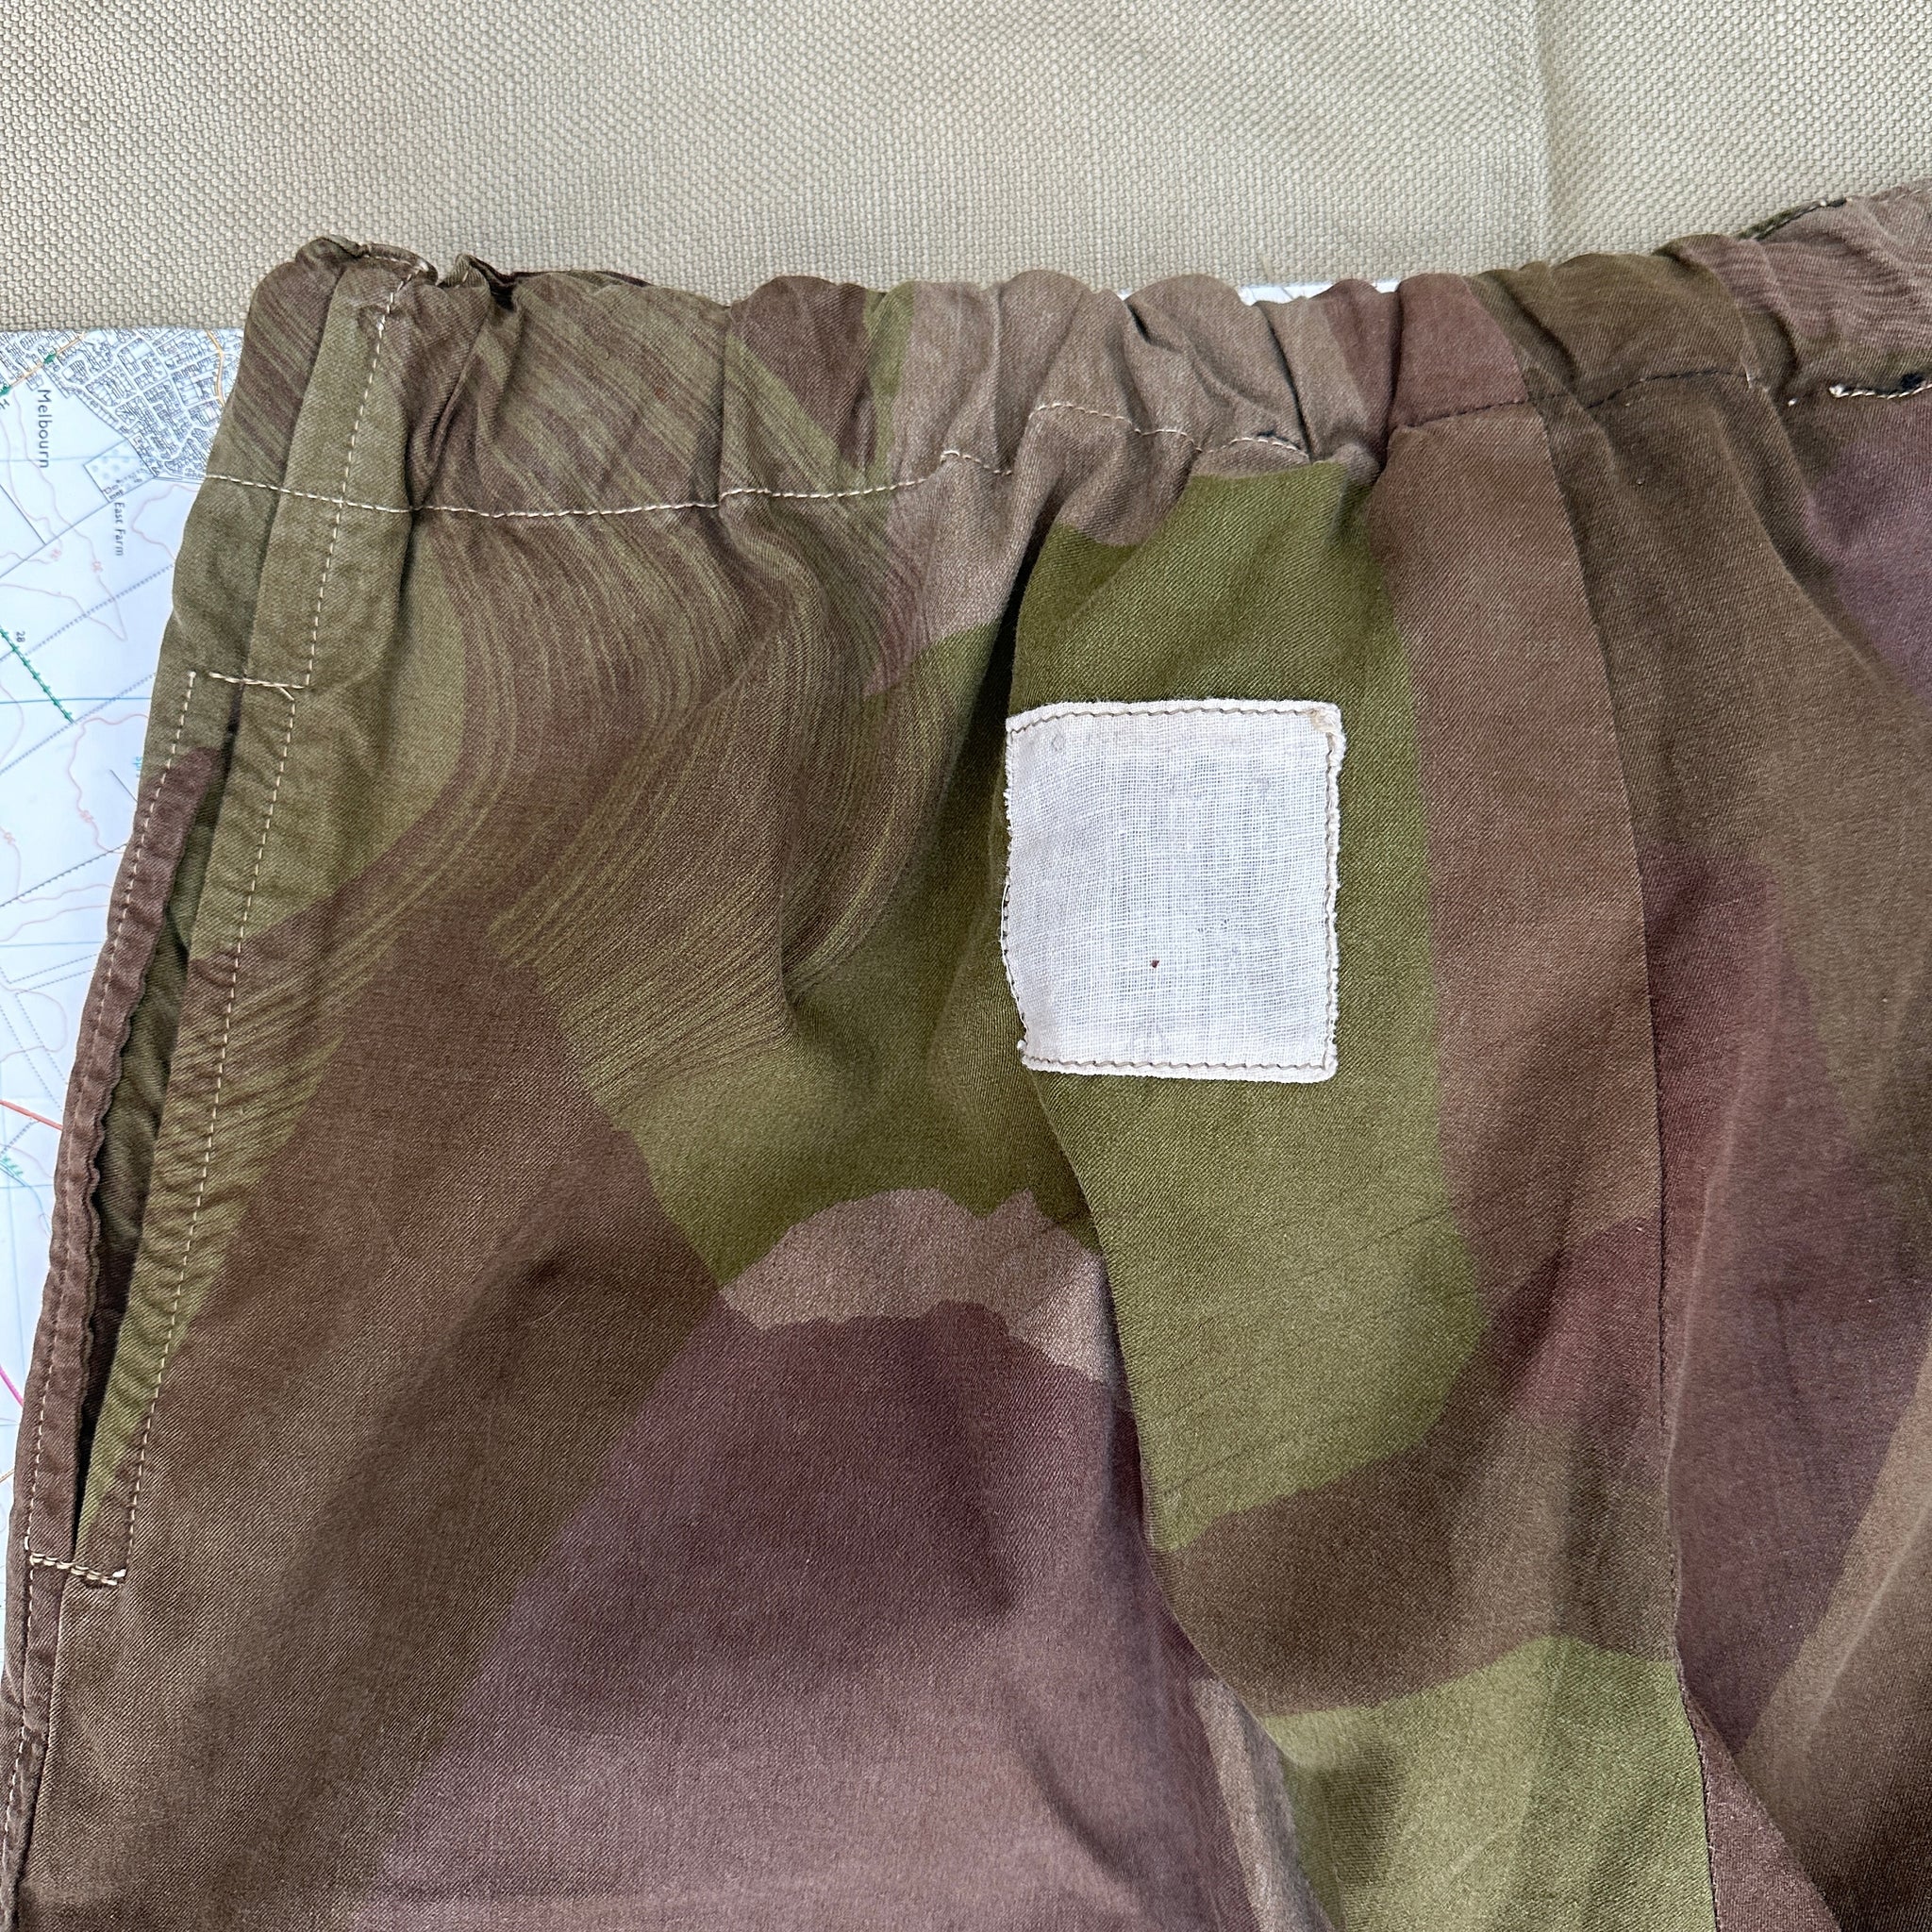 British Army WW2 Windproof Camo Trousers – The Major's Tailor